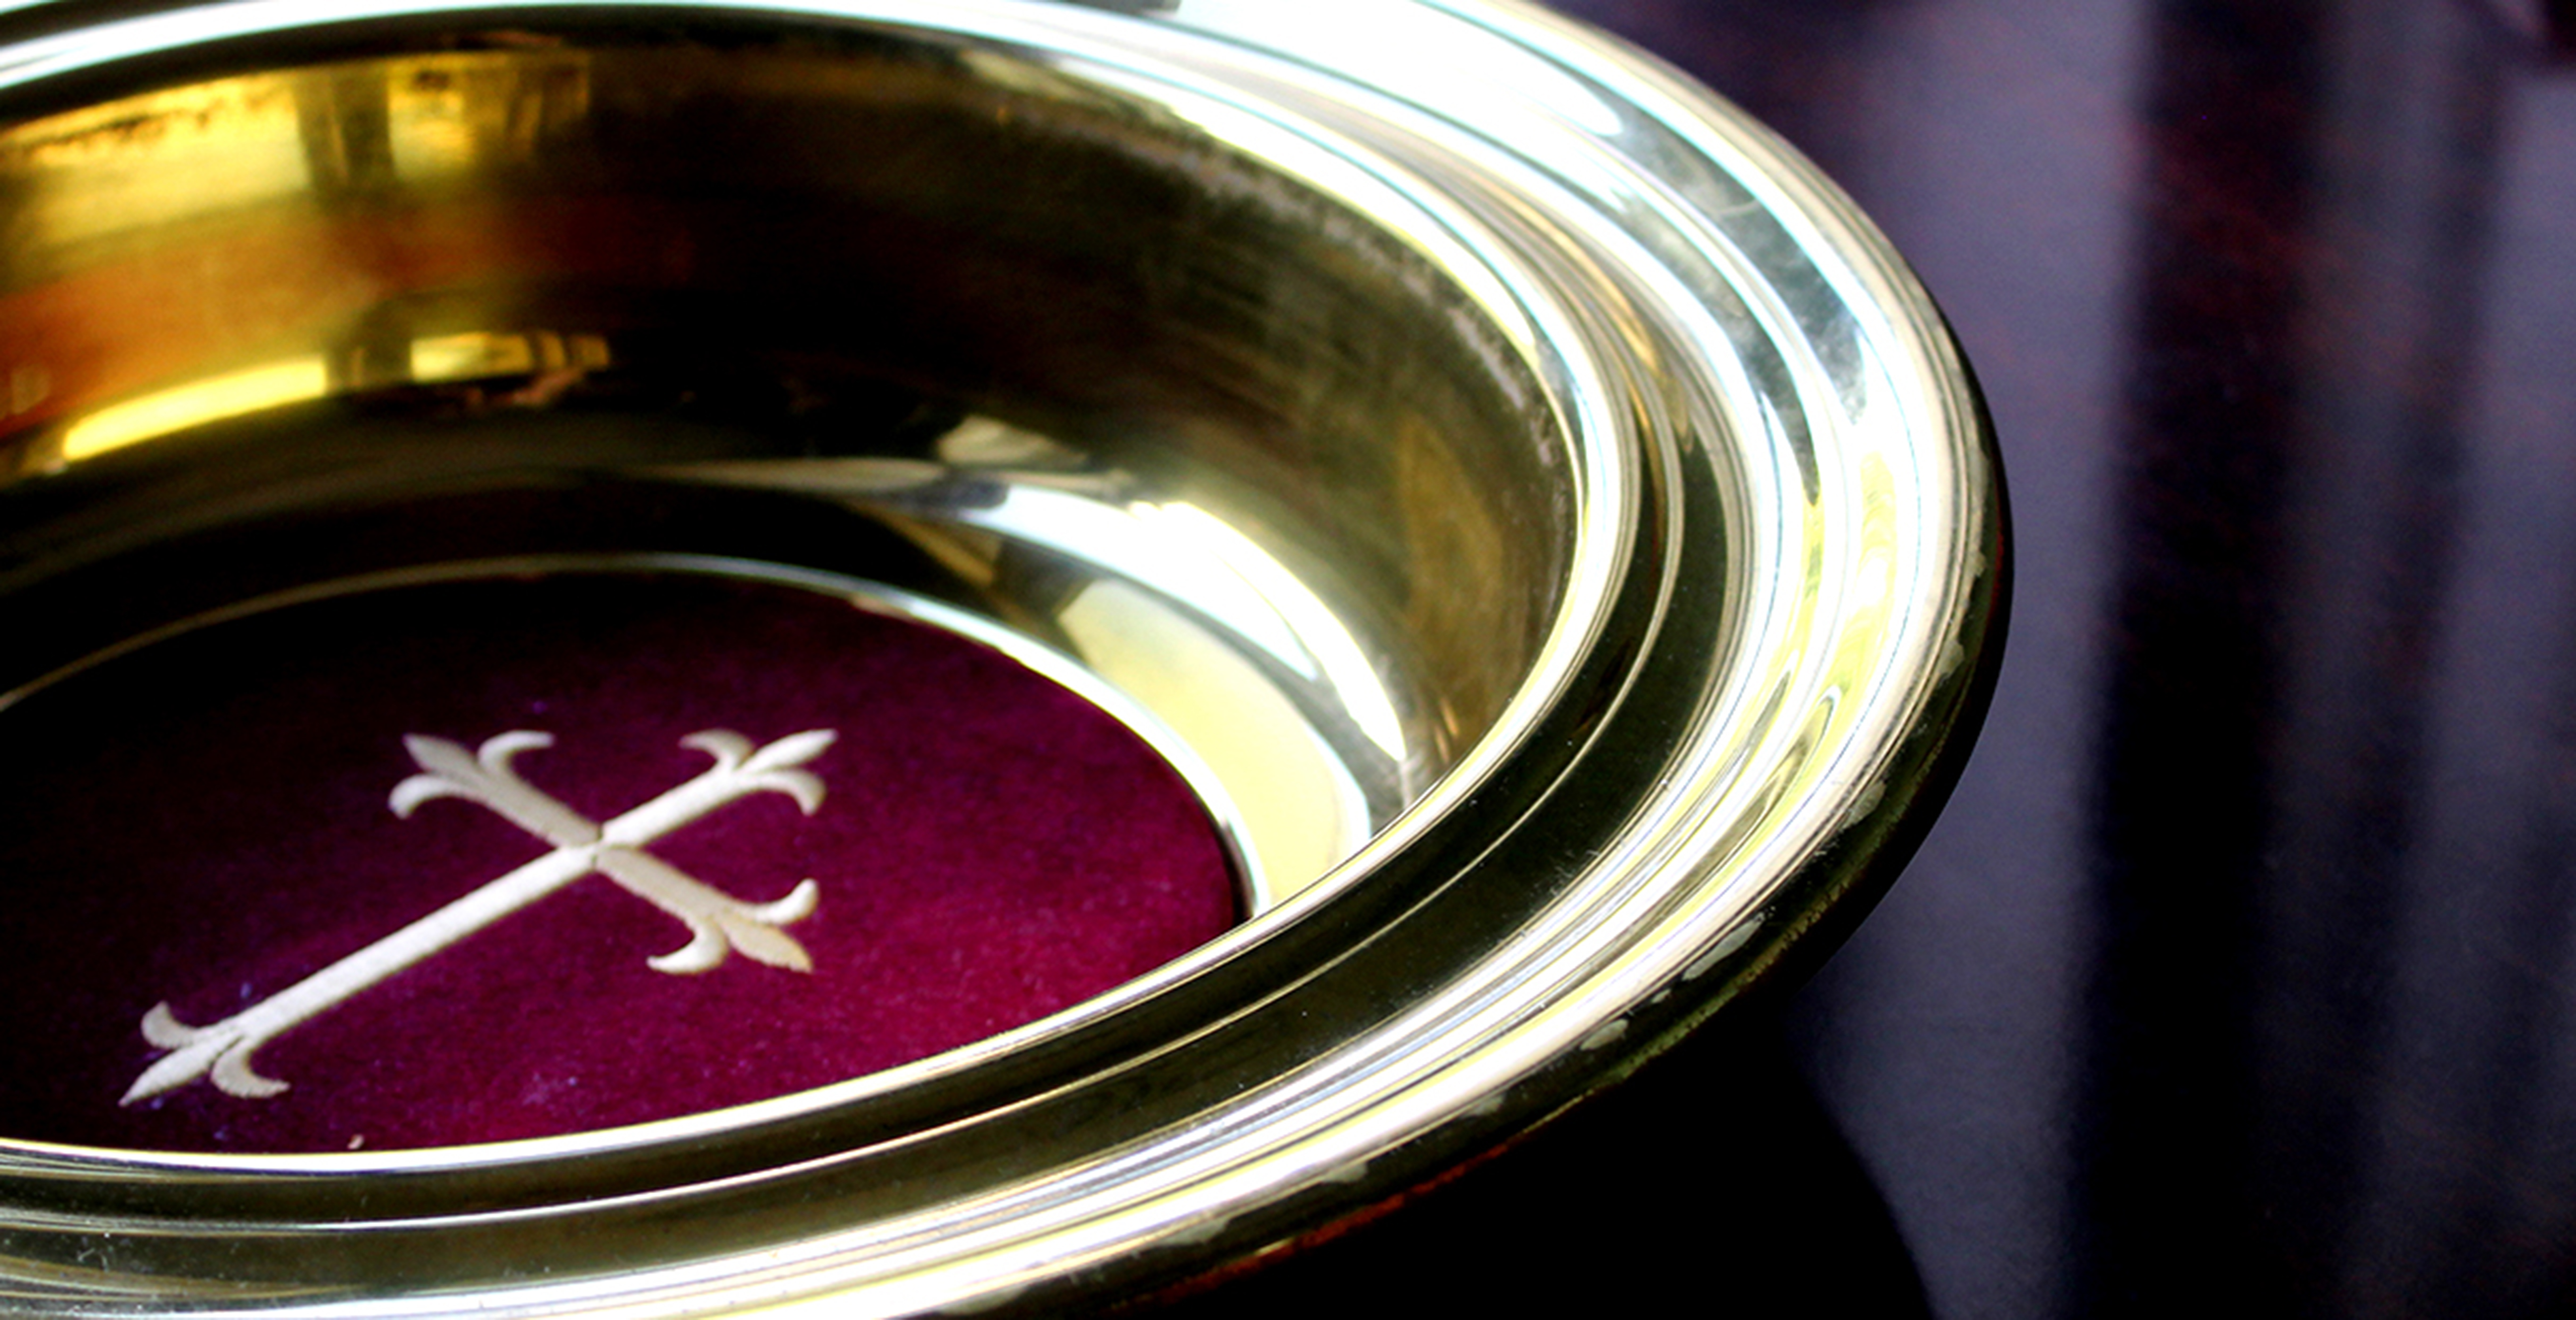 Offering plate images. A photo illustration by Kathryn Price, United Methodist Communications.